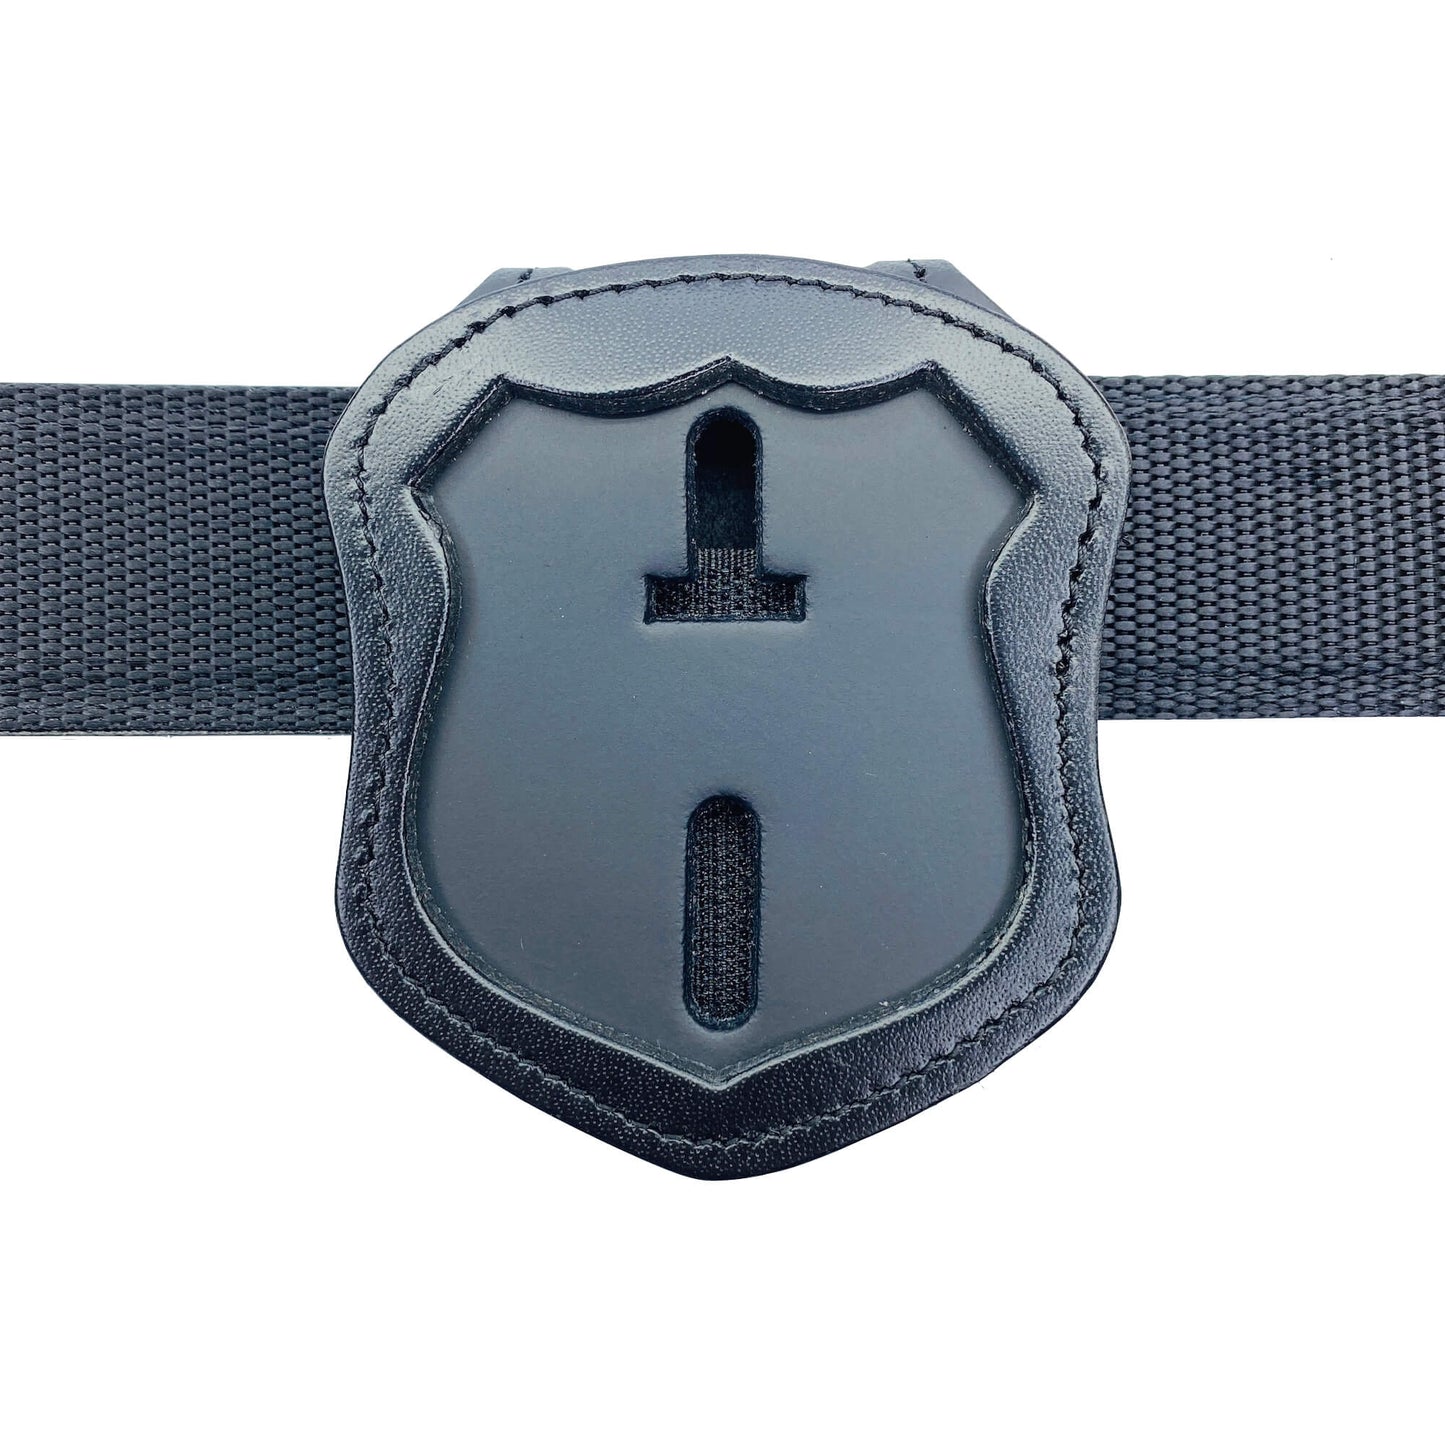 New York Police Department (NYPD) Police Officer Badge Belt Holder & Neck Chain-Perfect Fit-911 Duty Gear USA